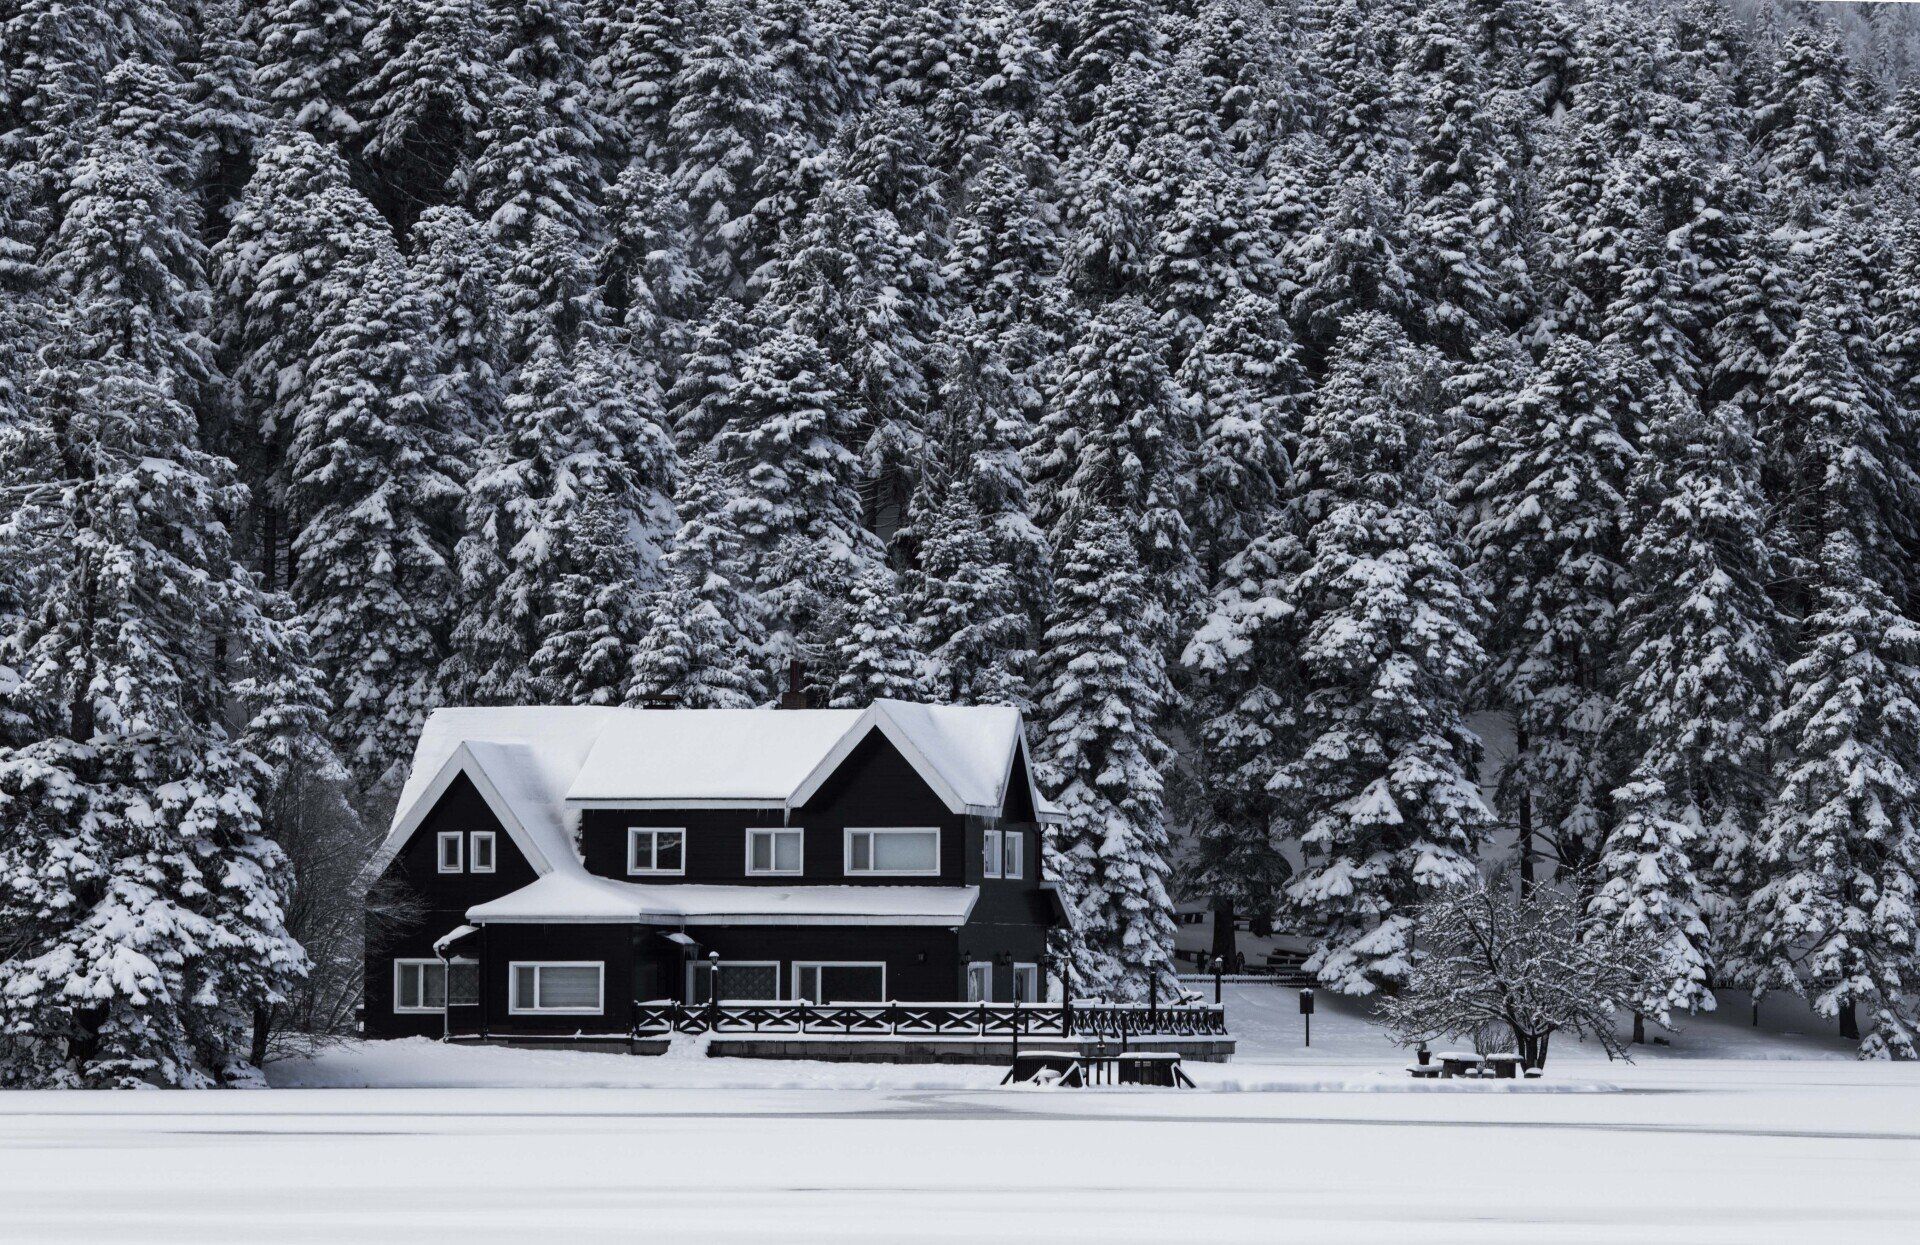 A brown house surrounded by a snowy forest in Vermont.